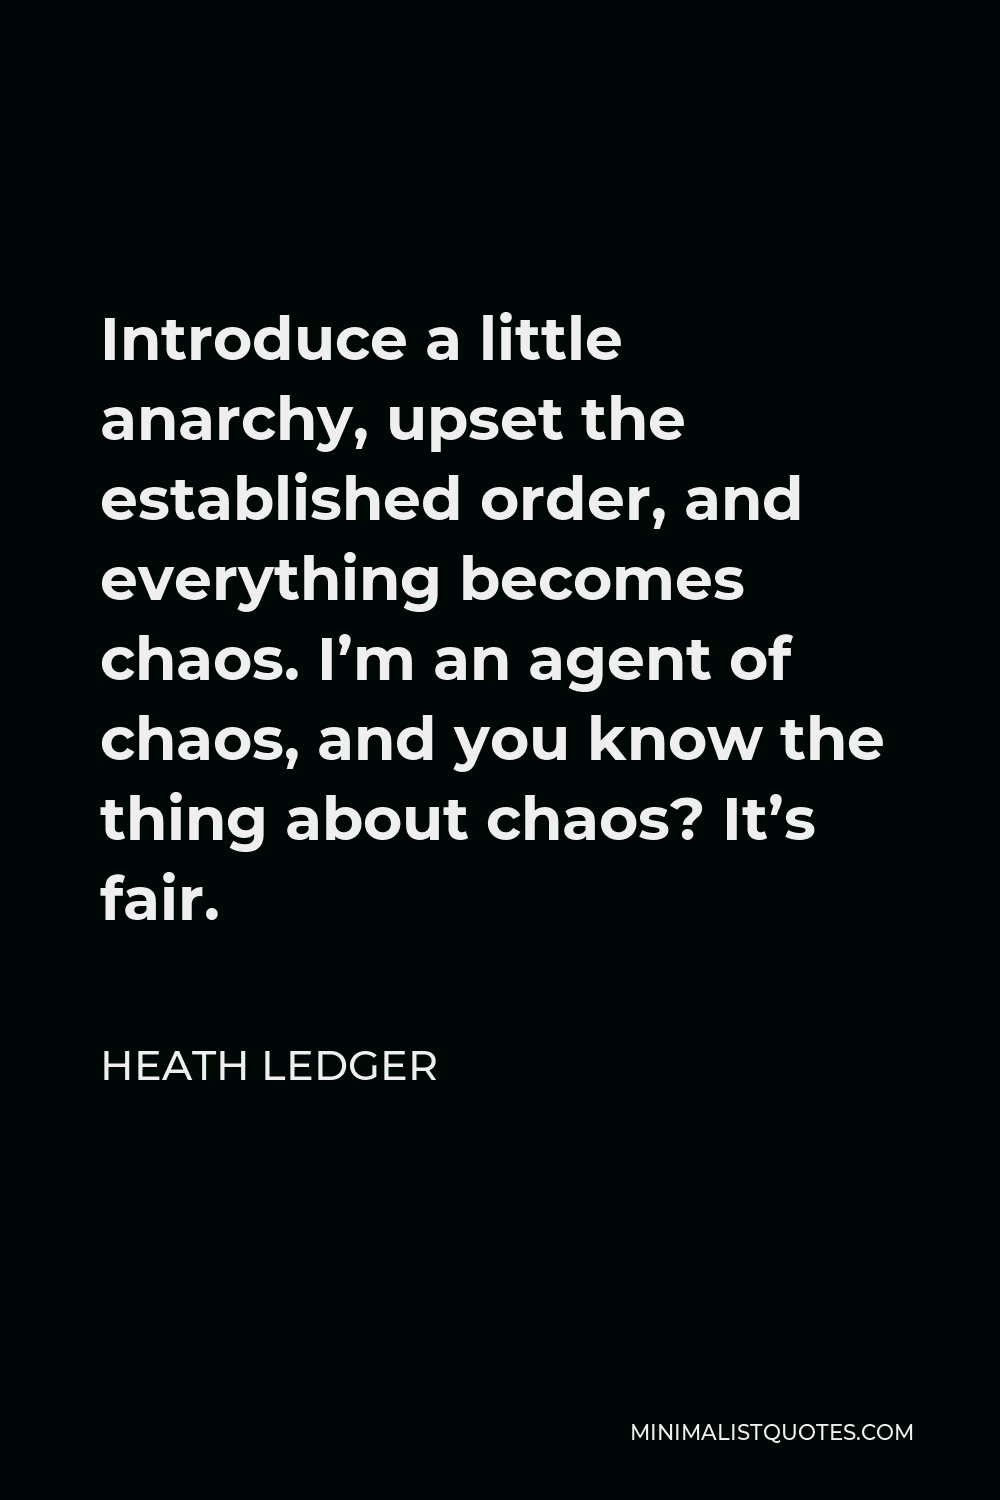 Heath Ledger Quote - Introduce a little anarchy, upset the established order, and everything becomes chaos. I’m an agent of chaos, and you know the thing about chaos? It’s fair.